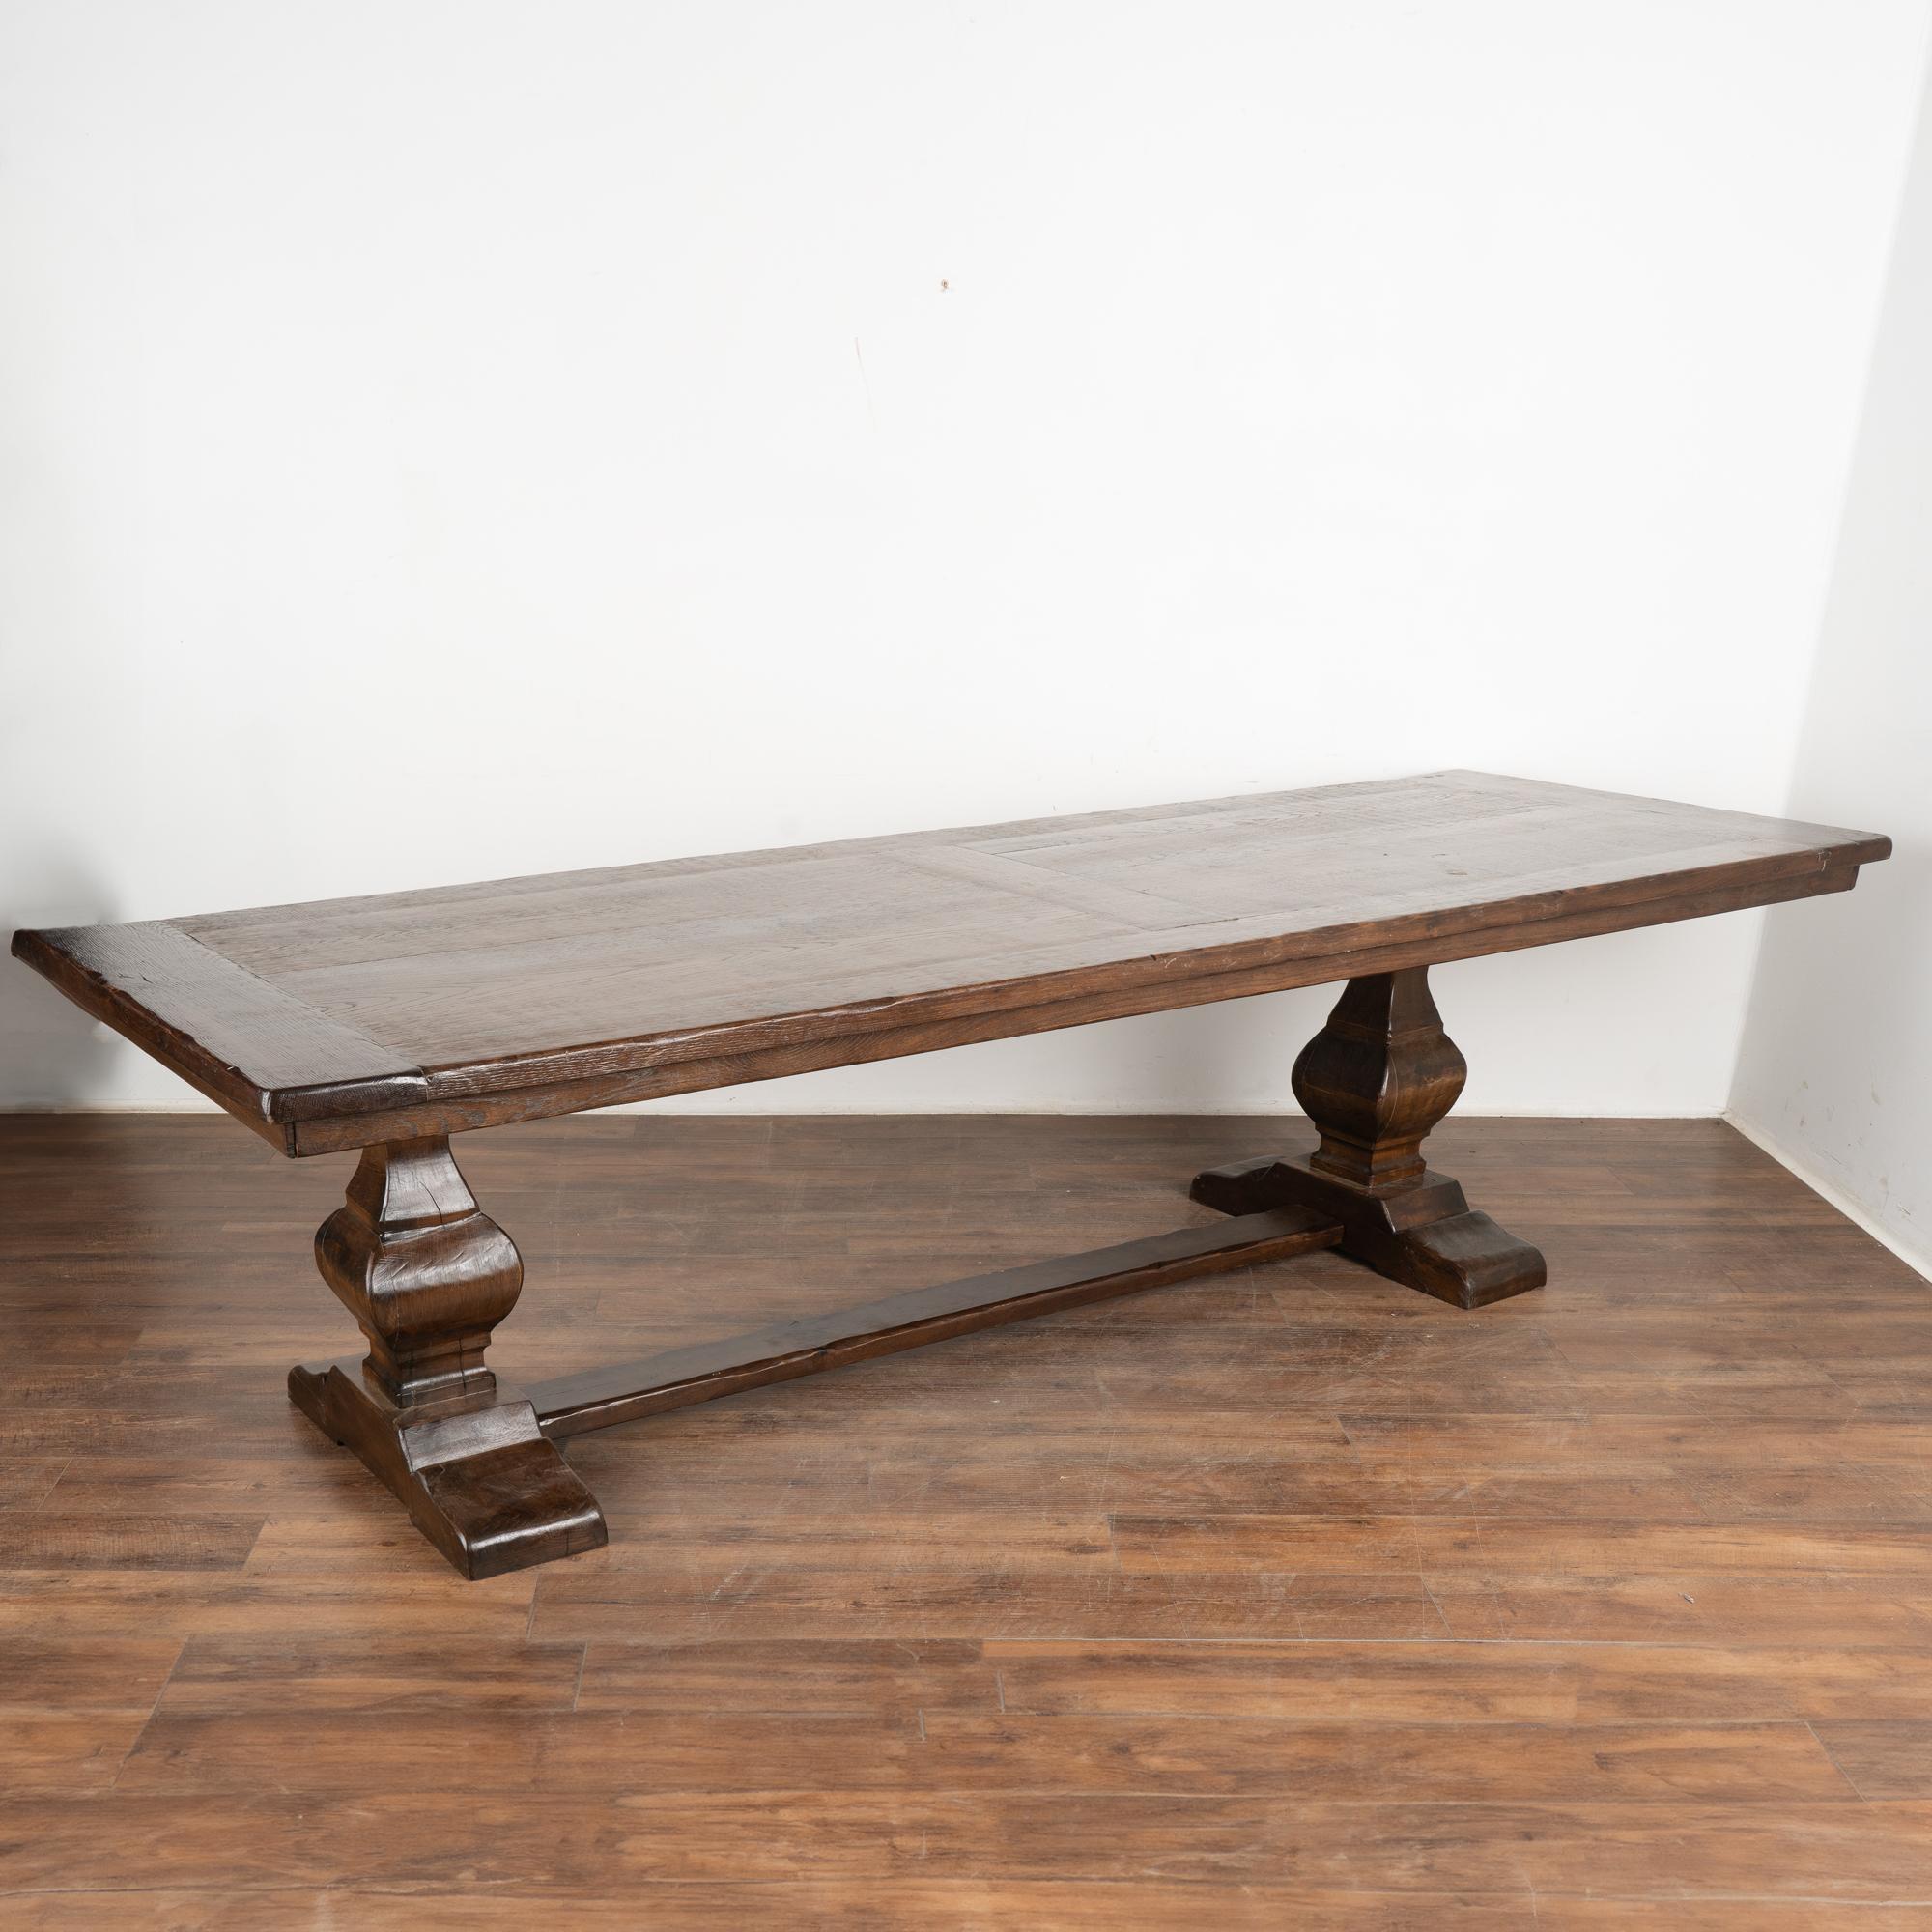 Striking in size at just under 10' long, this dramatic dining table will make a grand gathering place in today's modern home.
The heavy oak top is impressive; rich character is revealed in the scratches, nicks, and distress which create the appeal